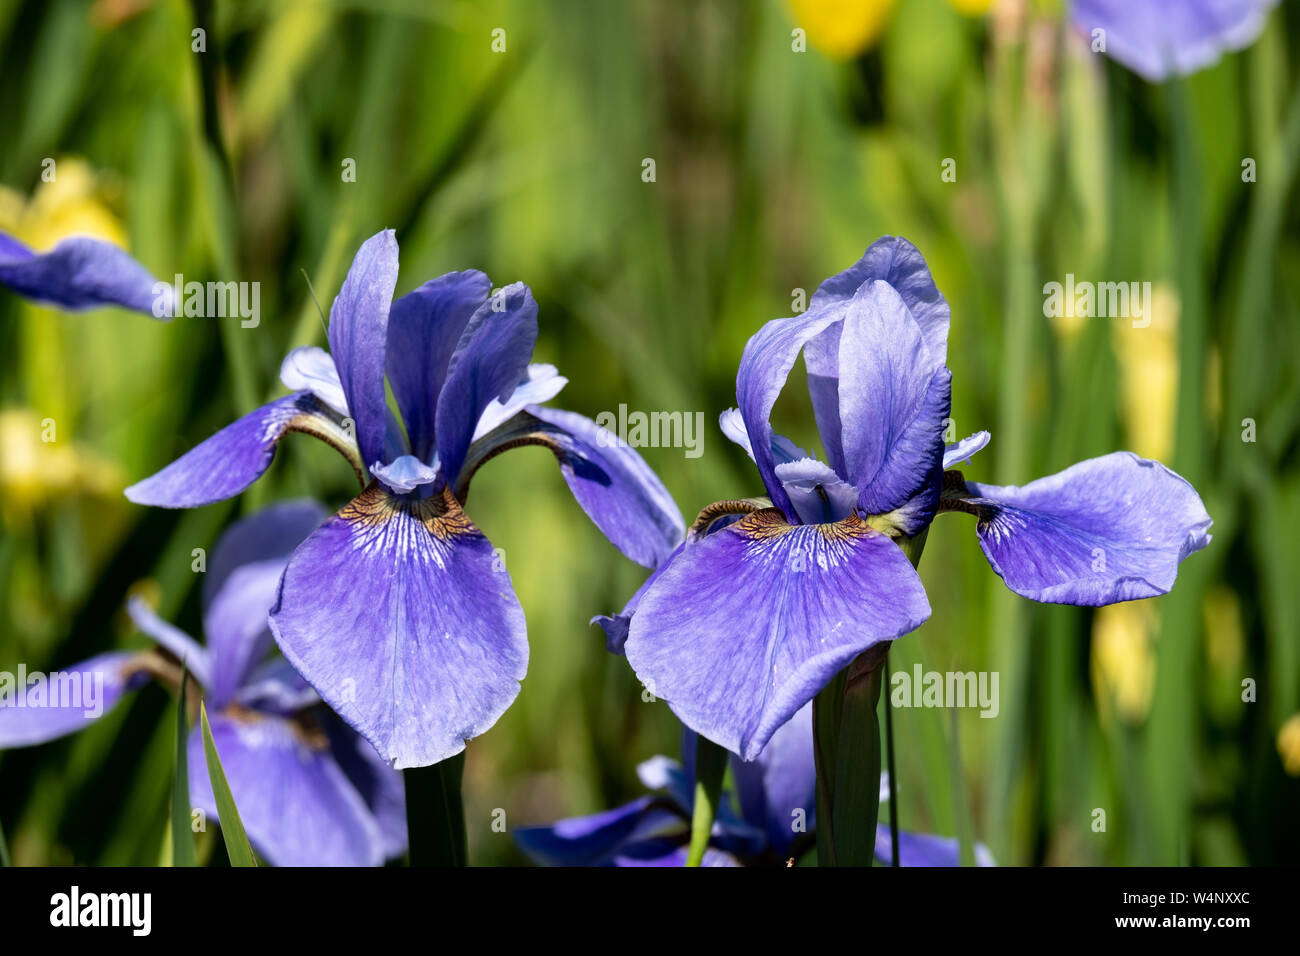 Close-up of two blue flowers Iris Sibirica on green background Stock Photo